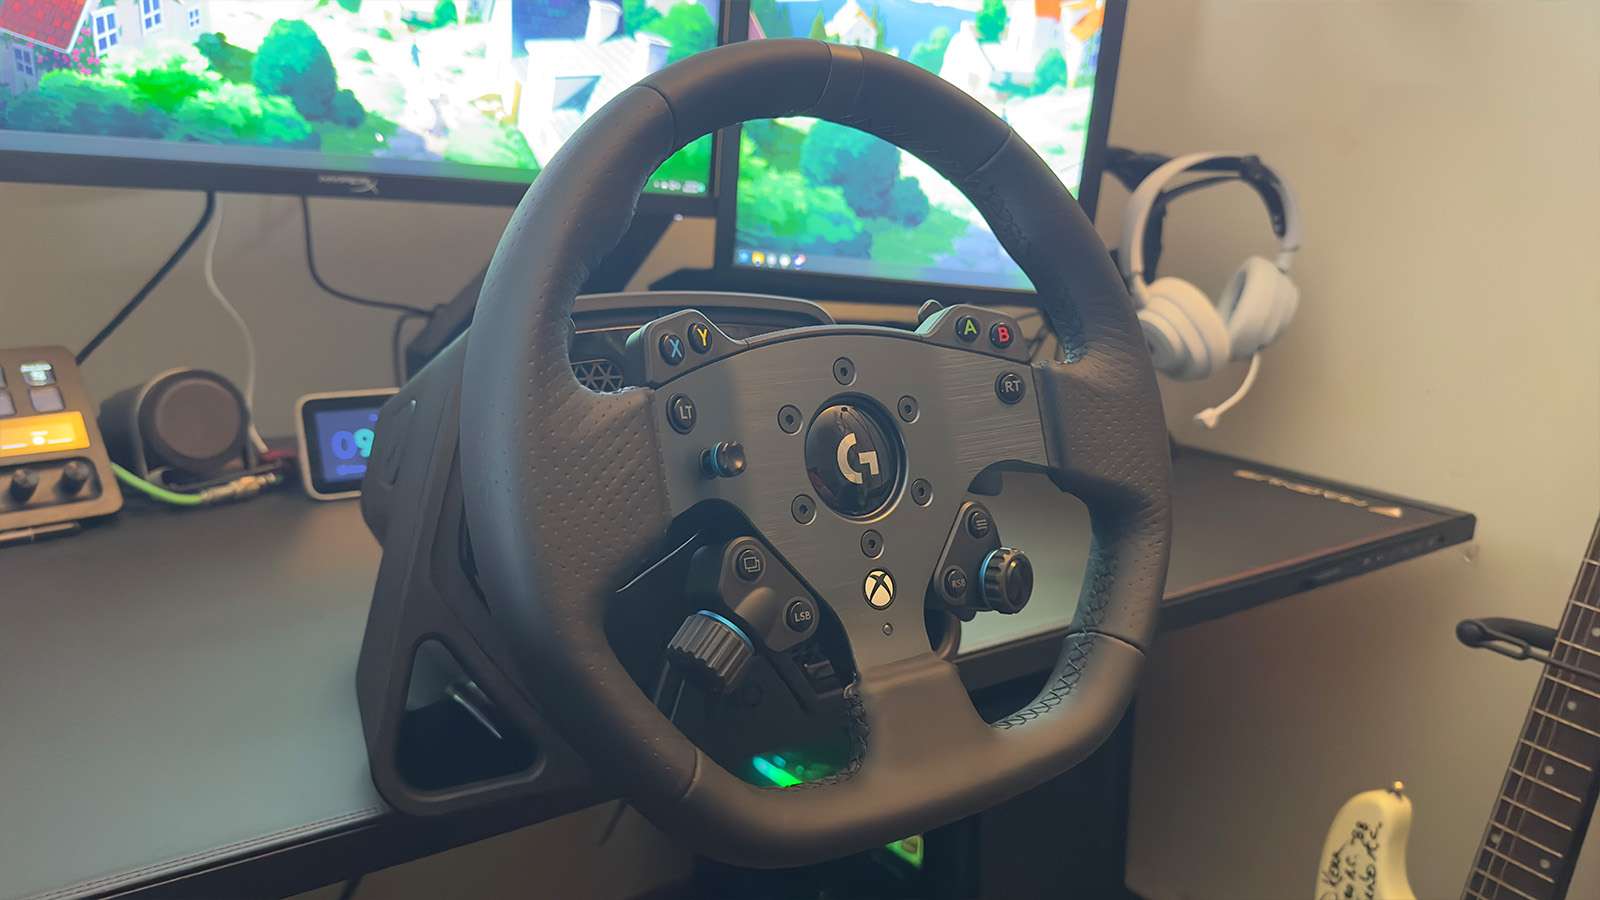 Logitech G Pro Racing Wheel & Pedals review: The perfect upgrade